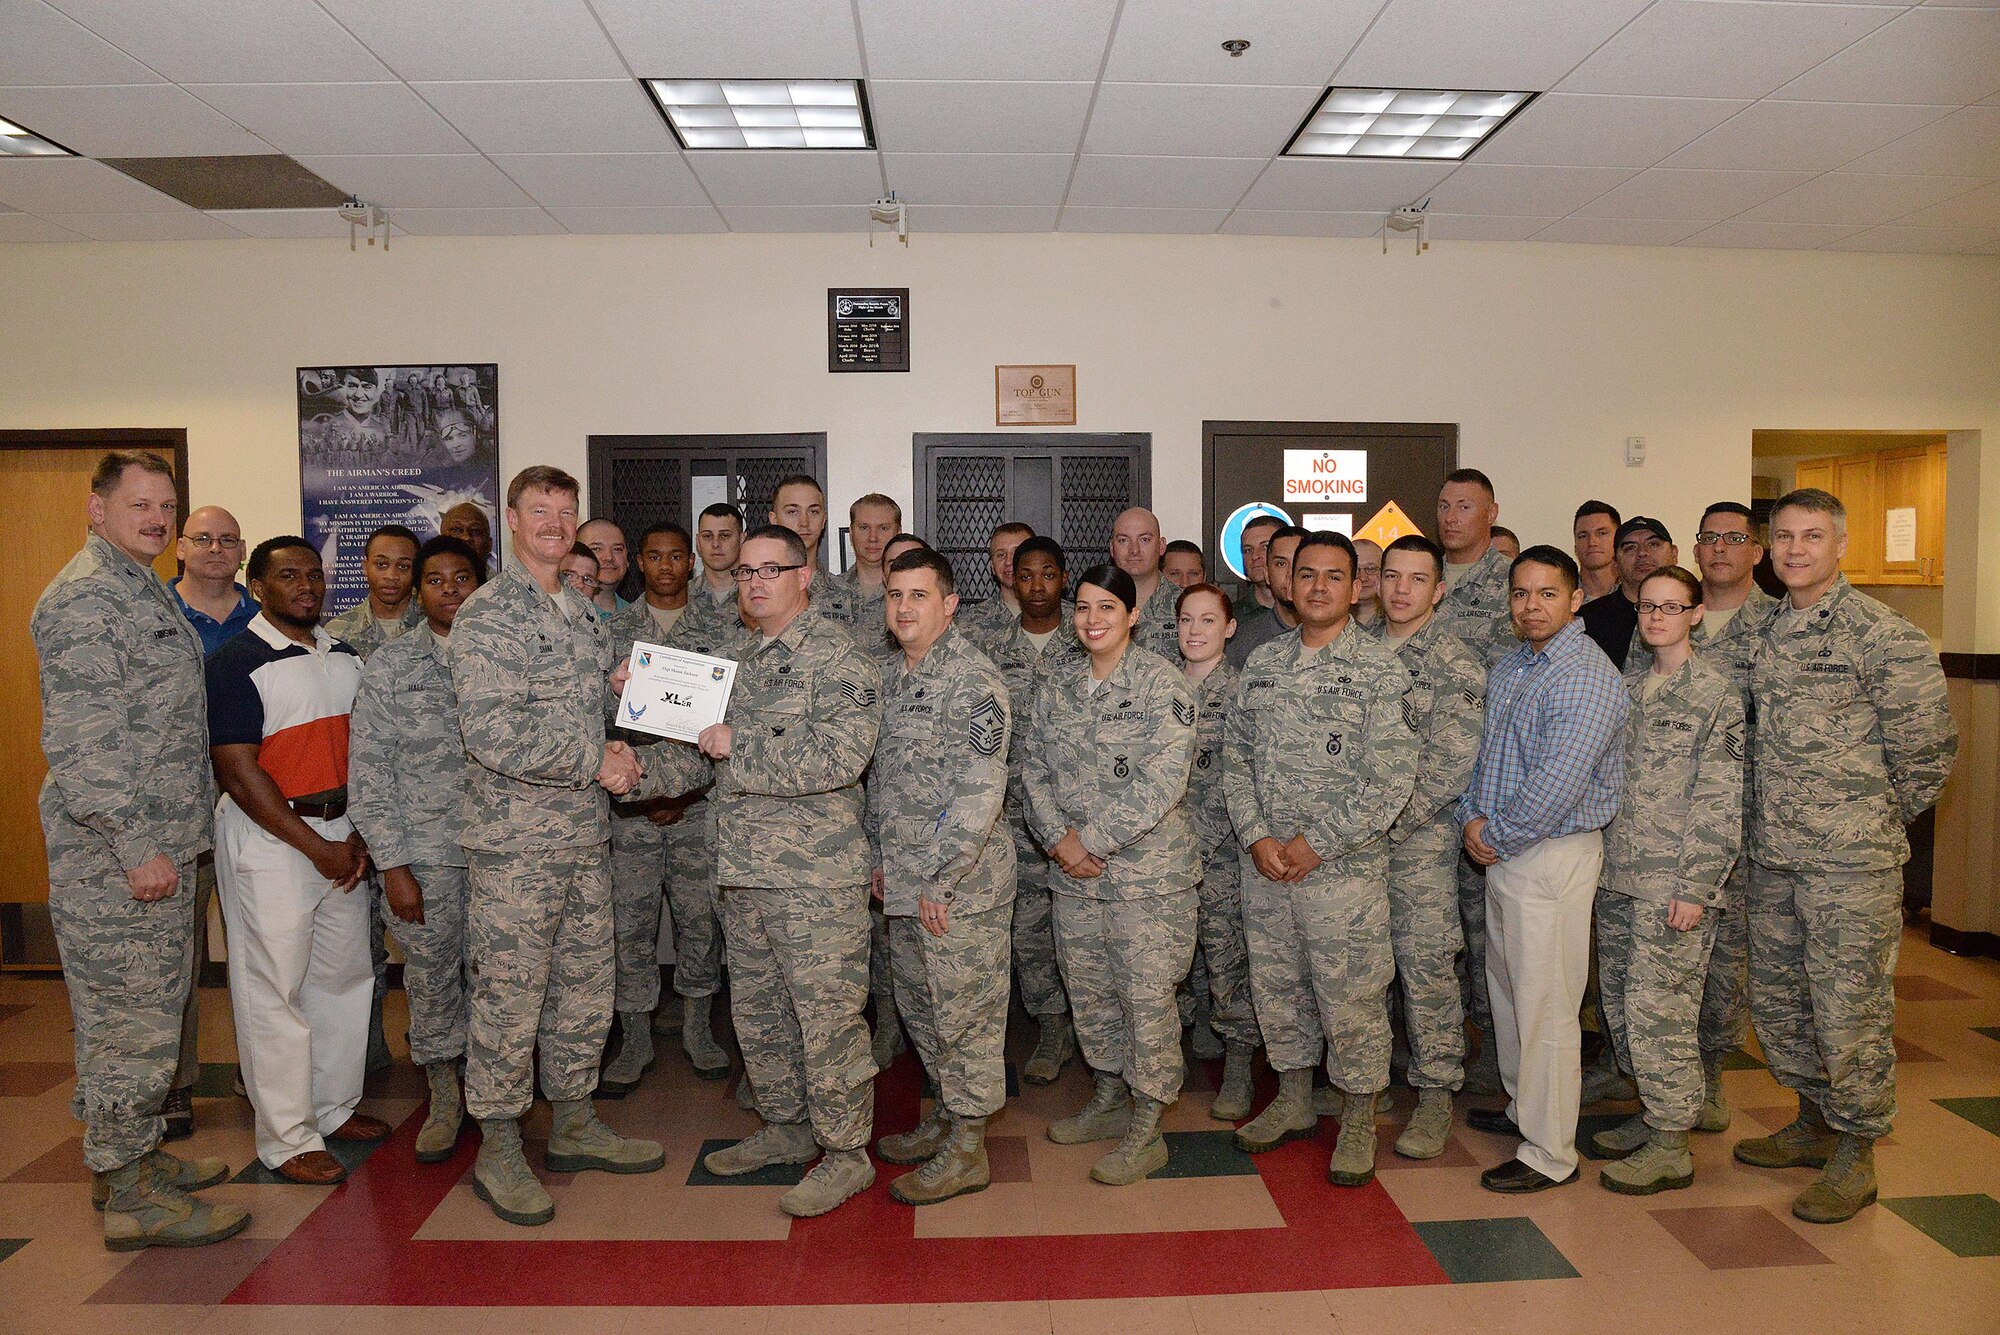 Staff Sgt. Shaun Jackson, 47th Security Forces Squadron unit training section NCO in charge (center), accepts the “XLer of the Week” award from Col. Thomas Shank, 47th Flying Training Wing commander (left), and Chief Master Sgt. George Richey, 47th FTW command chief (right), on Laughlin Air Force Base, Texas, March 22, 2017. The XLer is a weekly award chosen by wing leadership and is presented to those who consistently make outstanding contributions to their unit and Laughlin. (U.S. Air Force photo/Airman 1st Class Daniel Hambor)